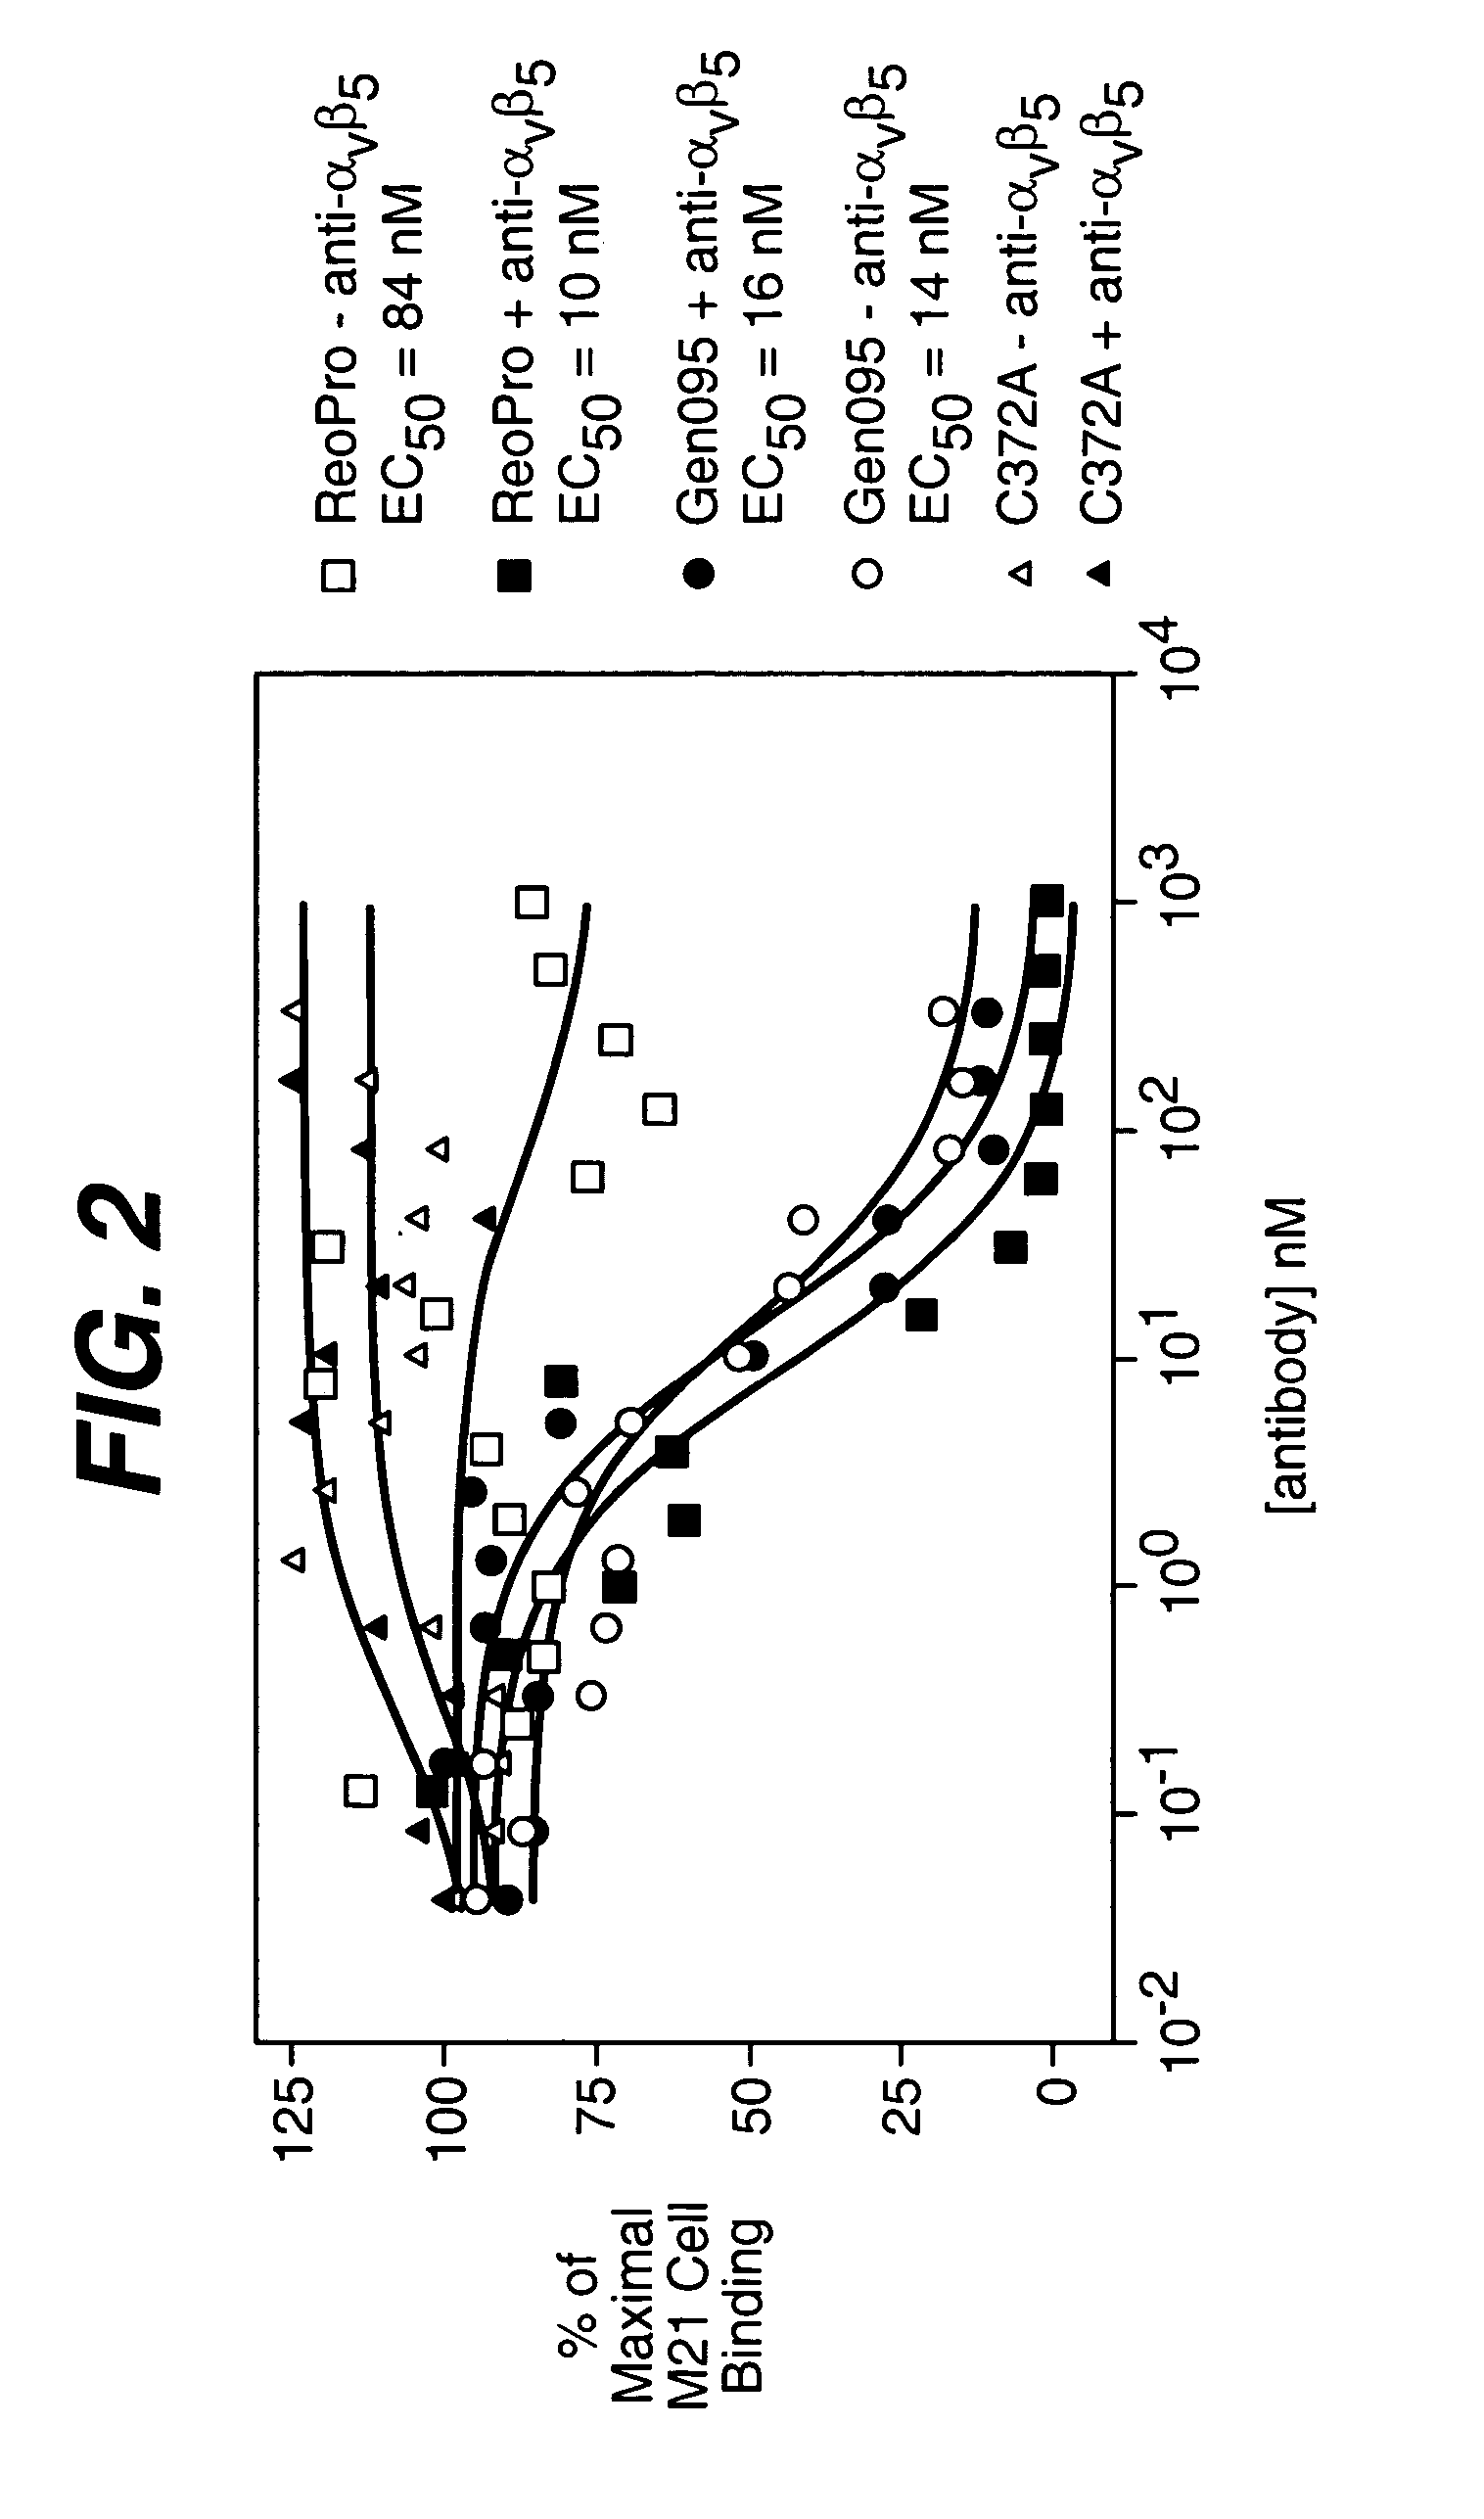 Anti-integrin antibodies, compositions, methods and uses